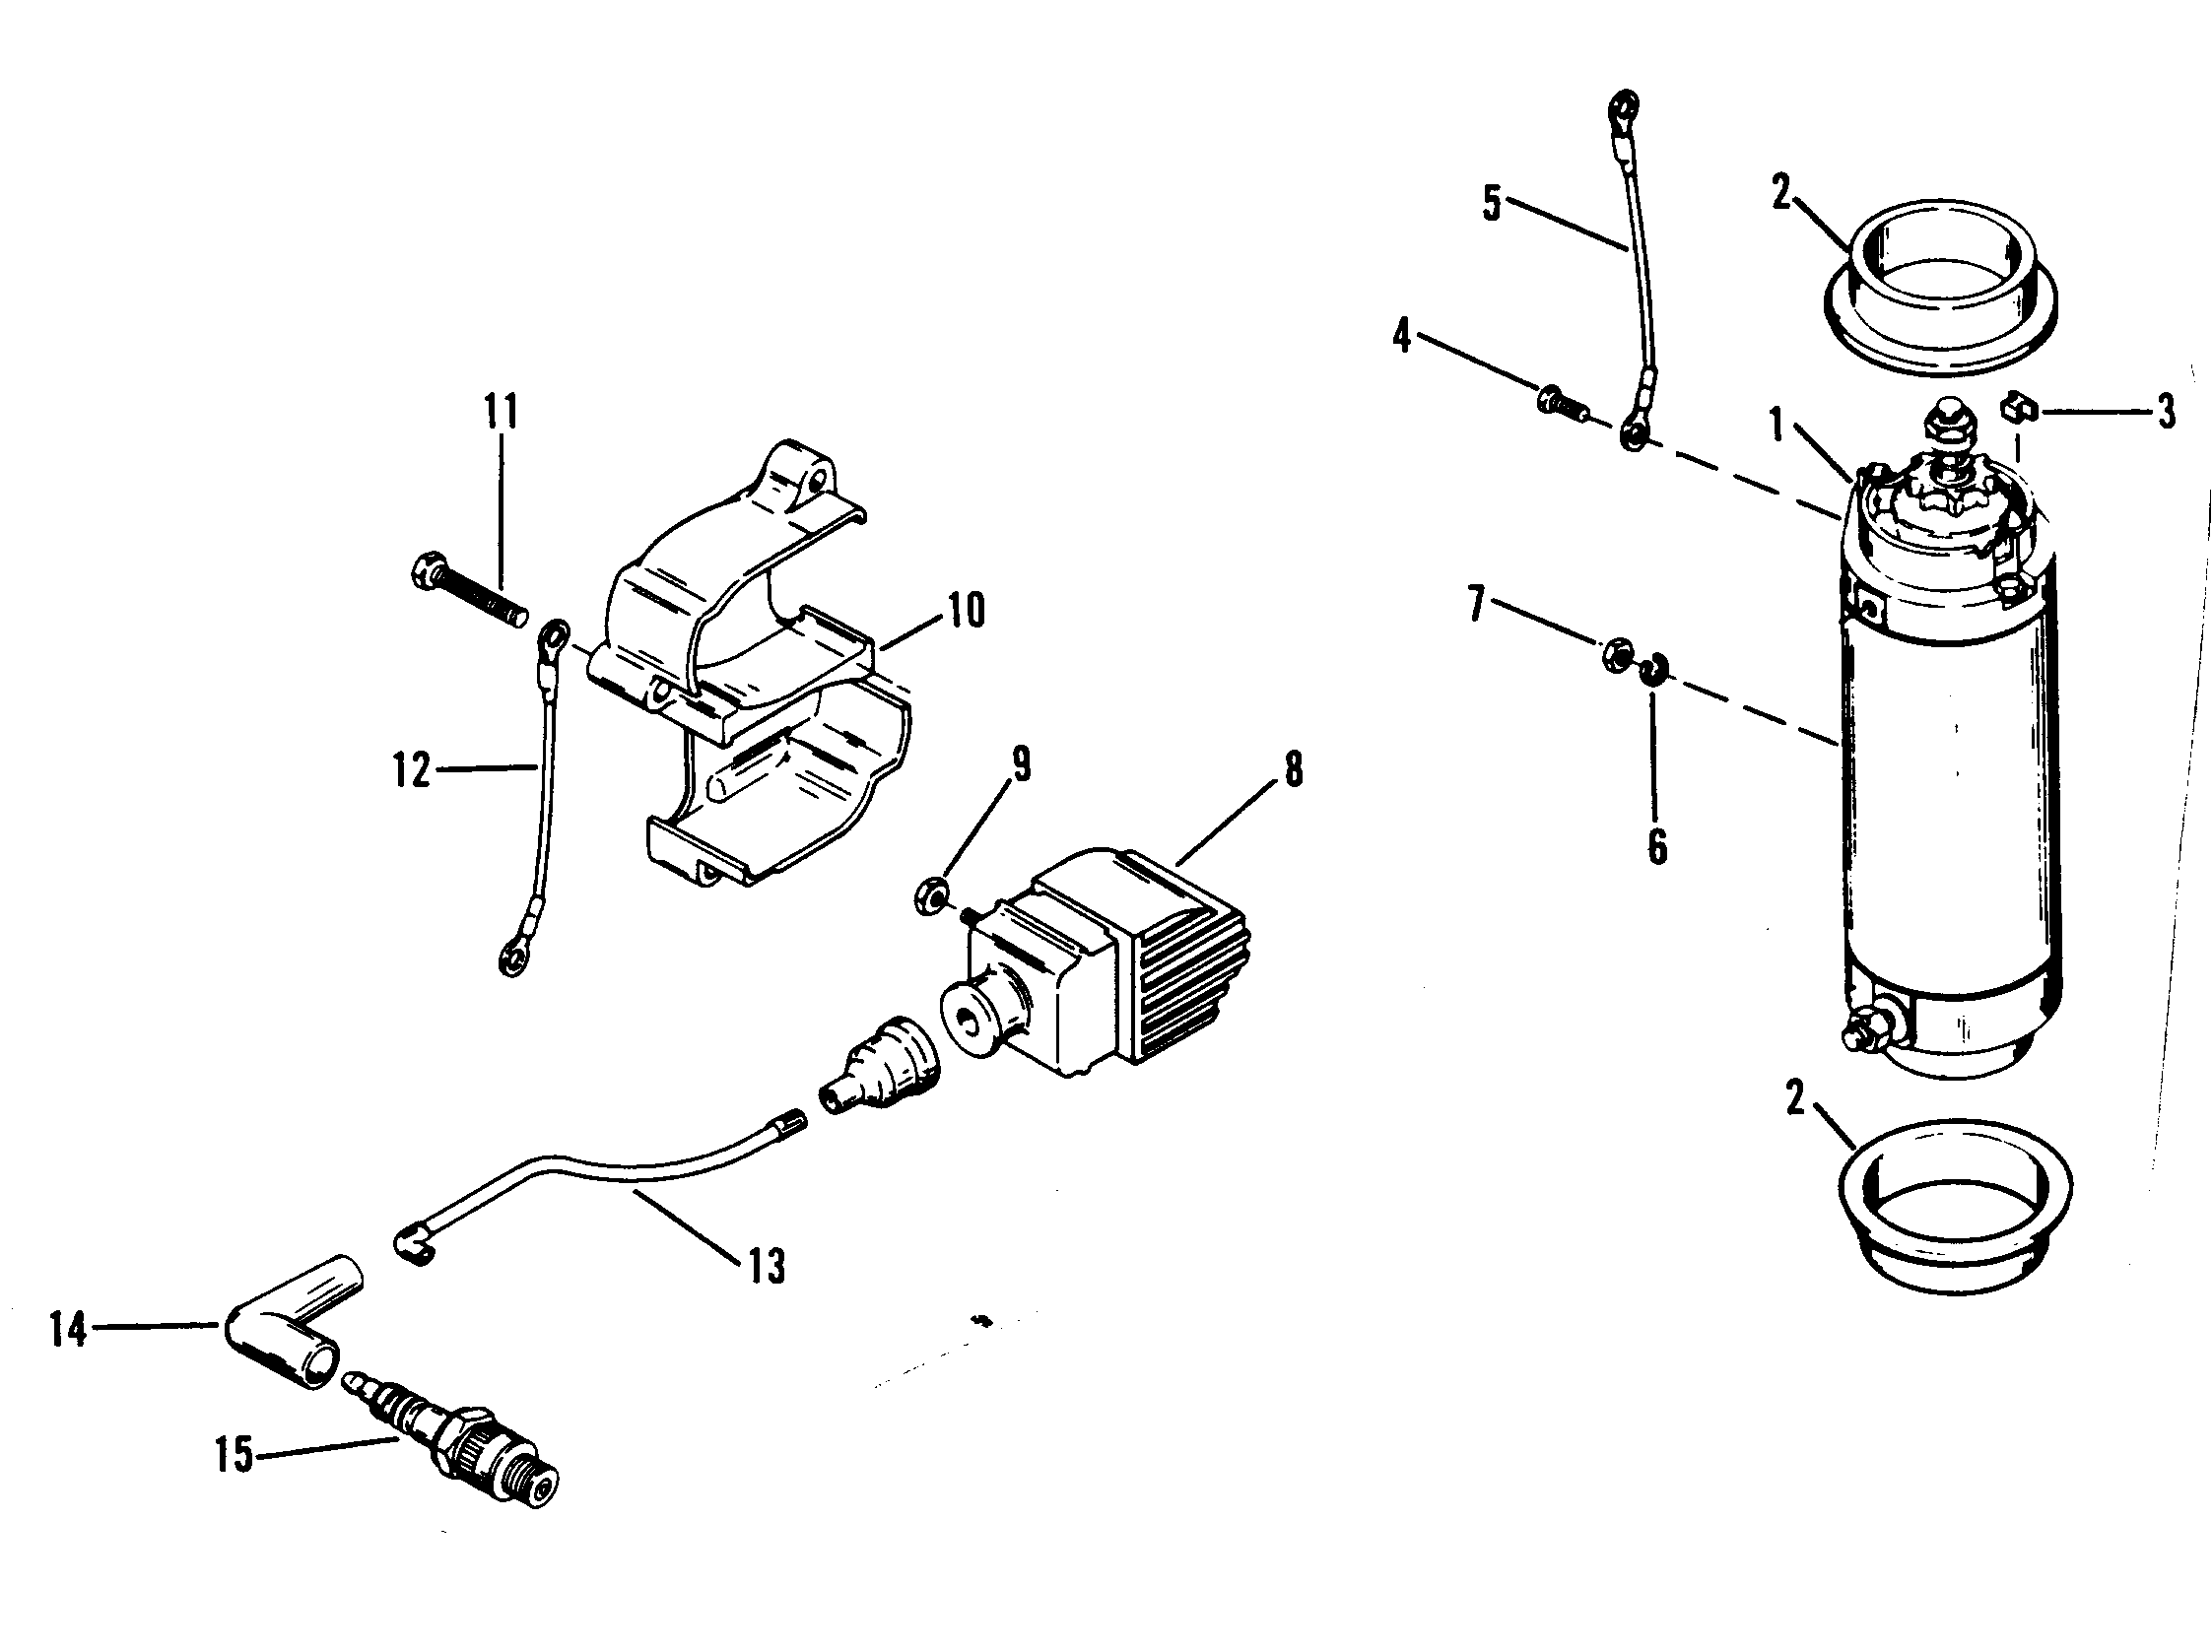 STARTER MOTOR AND IGNITION COILS